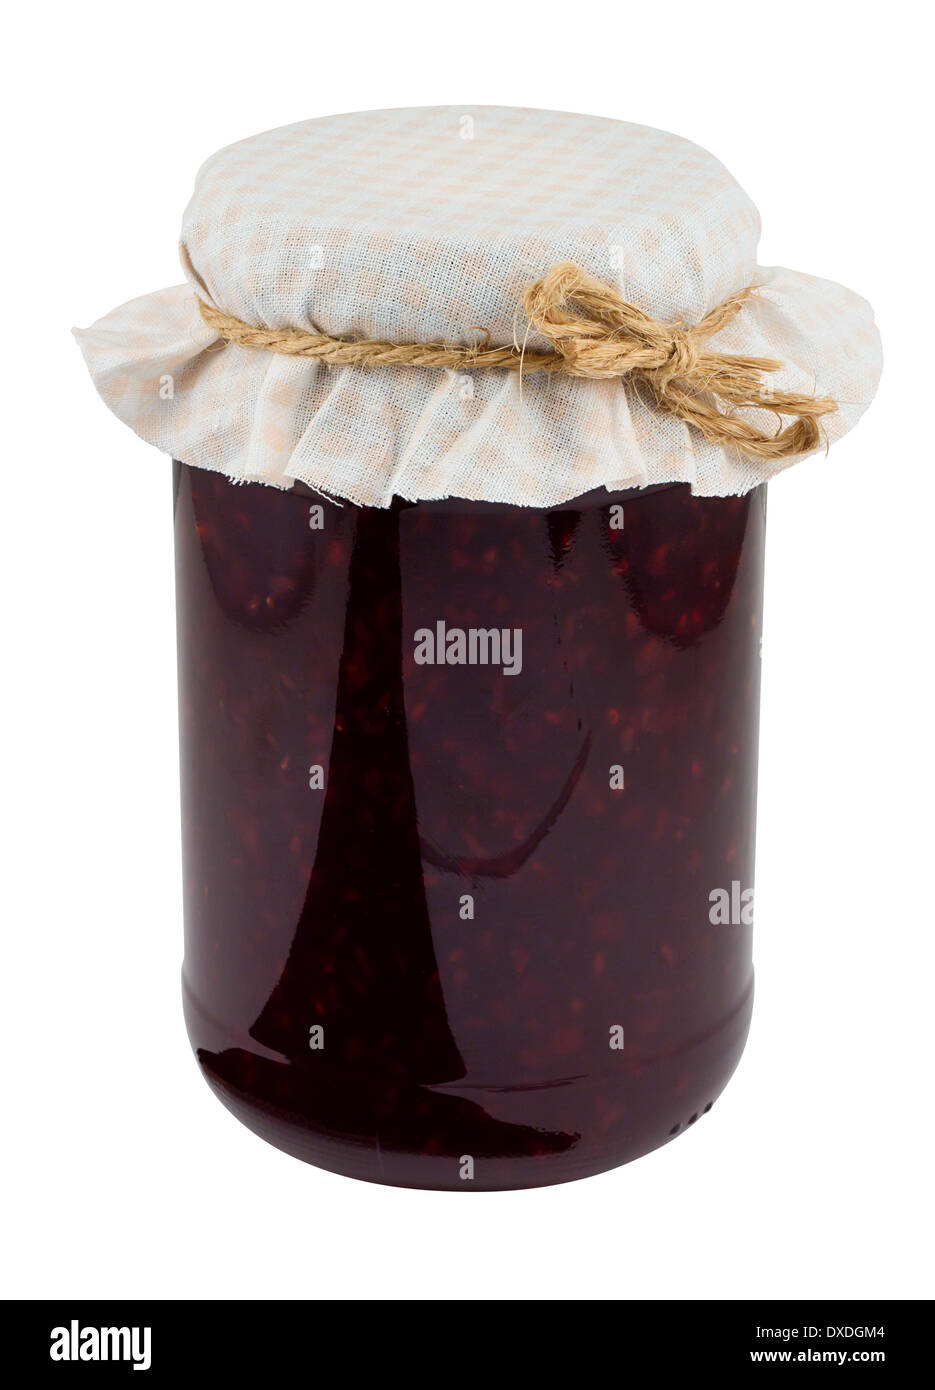 Raspberry jam a popular fruit conserve in a jar with traditional cloth lid isolated against a white background Stock Photo